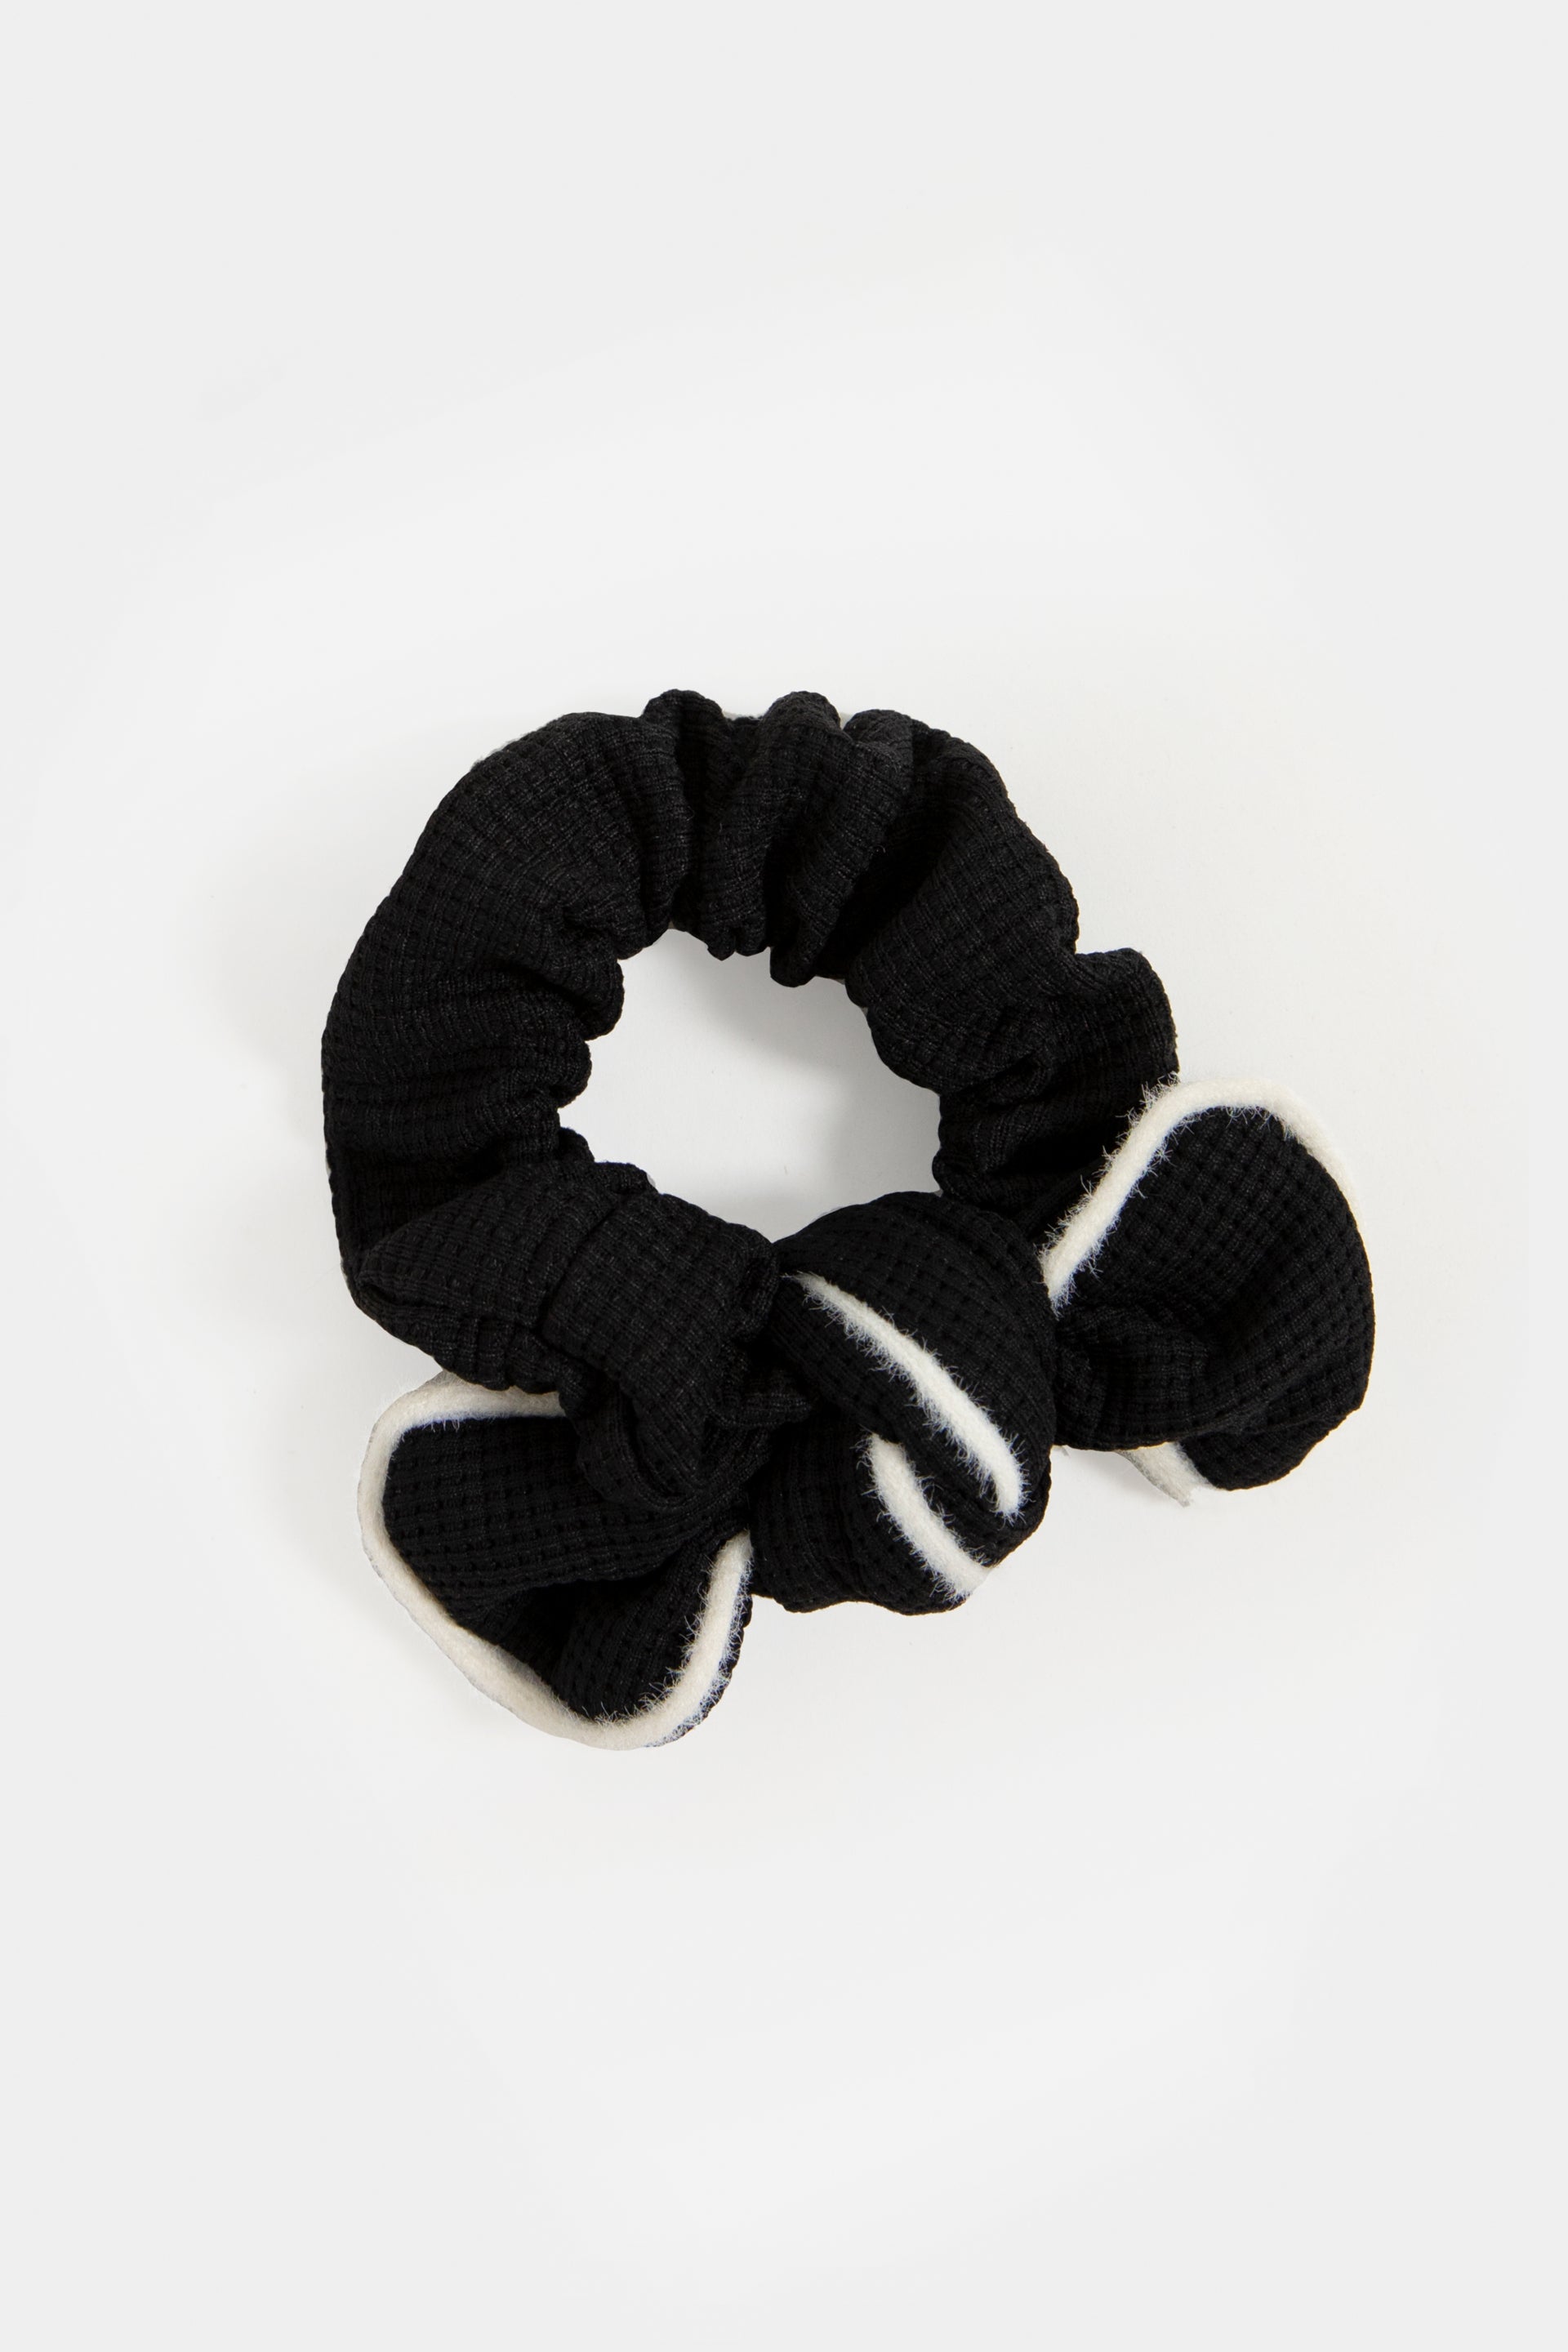 Pack of Basic Knot Scrunchies